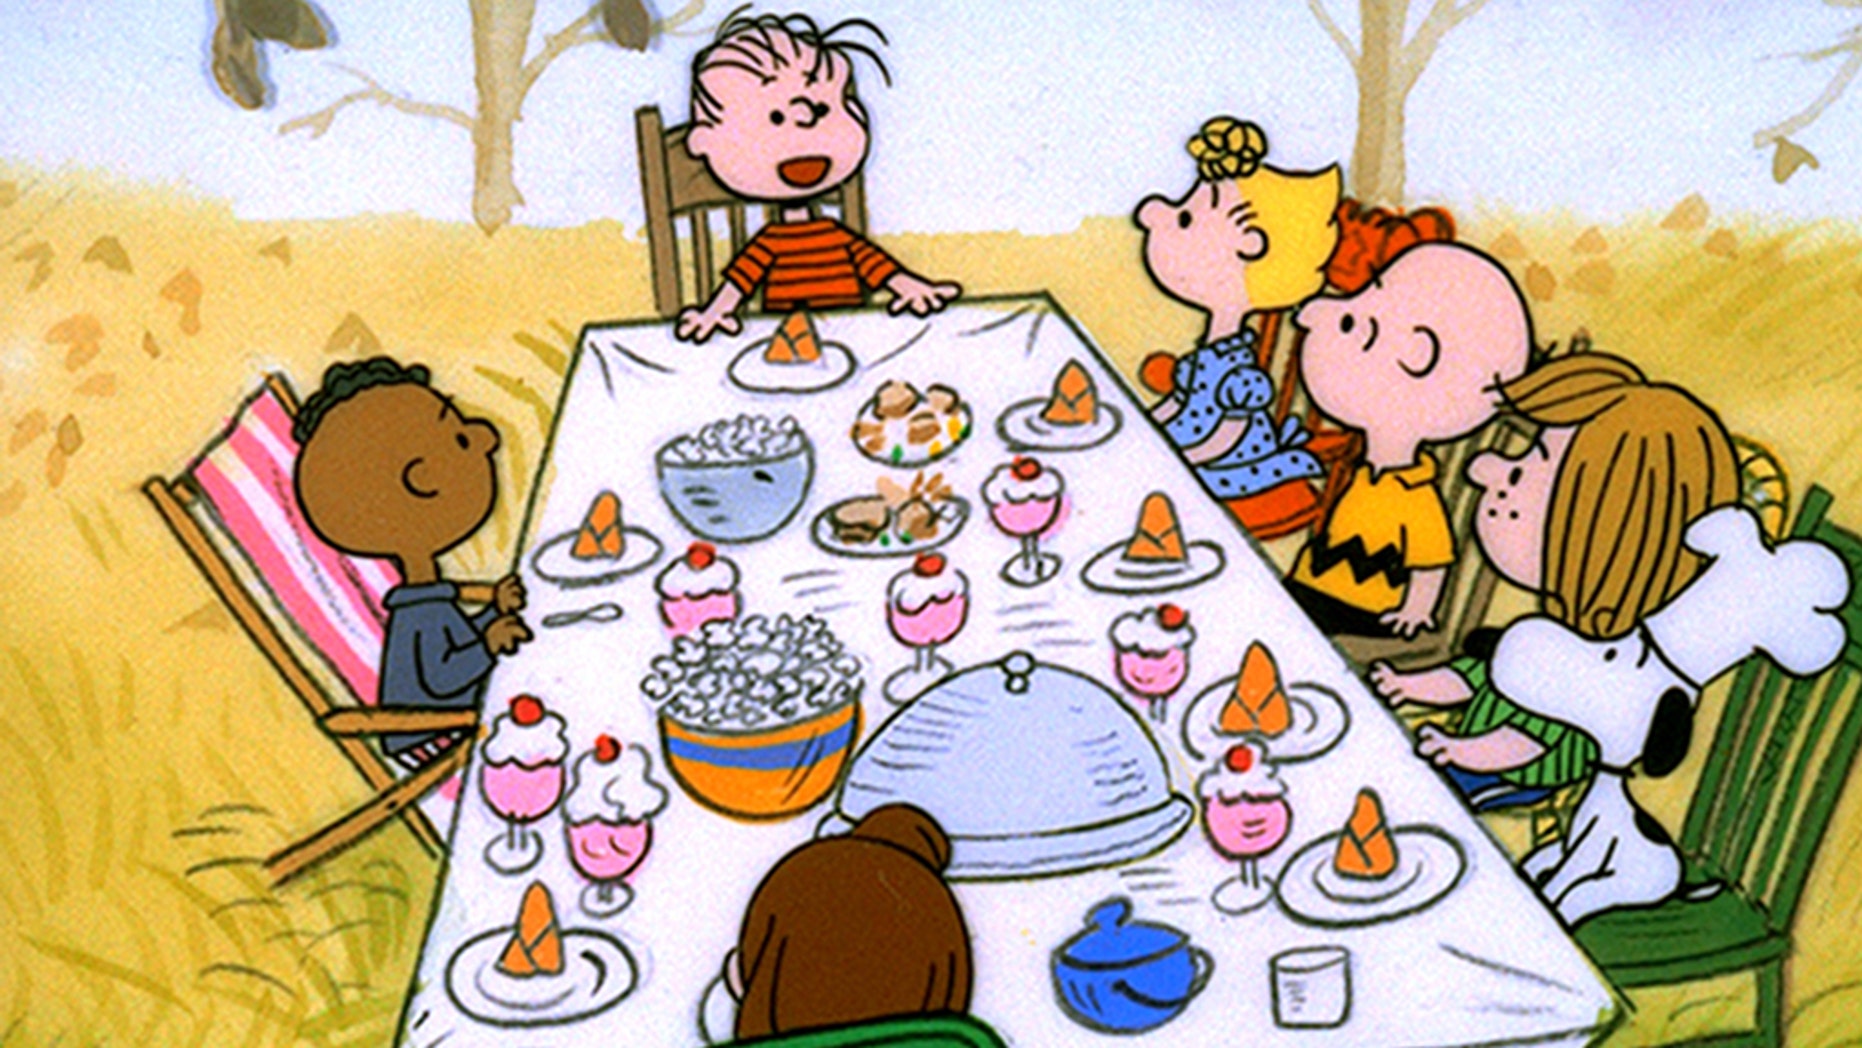 "A Charlie Brown Thanksgiving" is getting heat for it's portrayal of a black character.